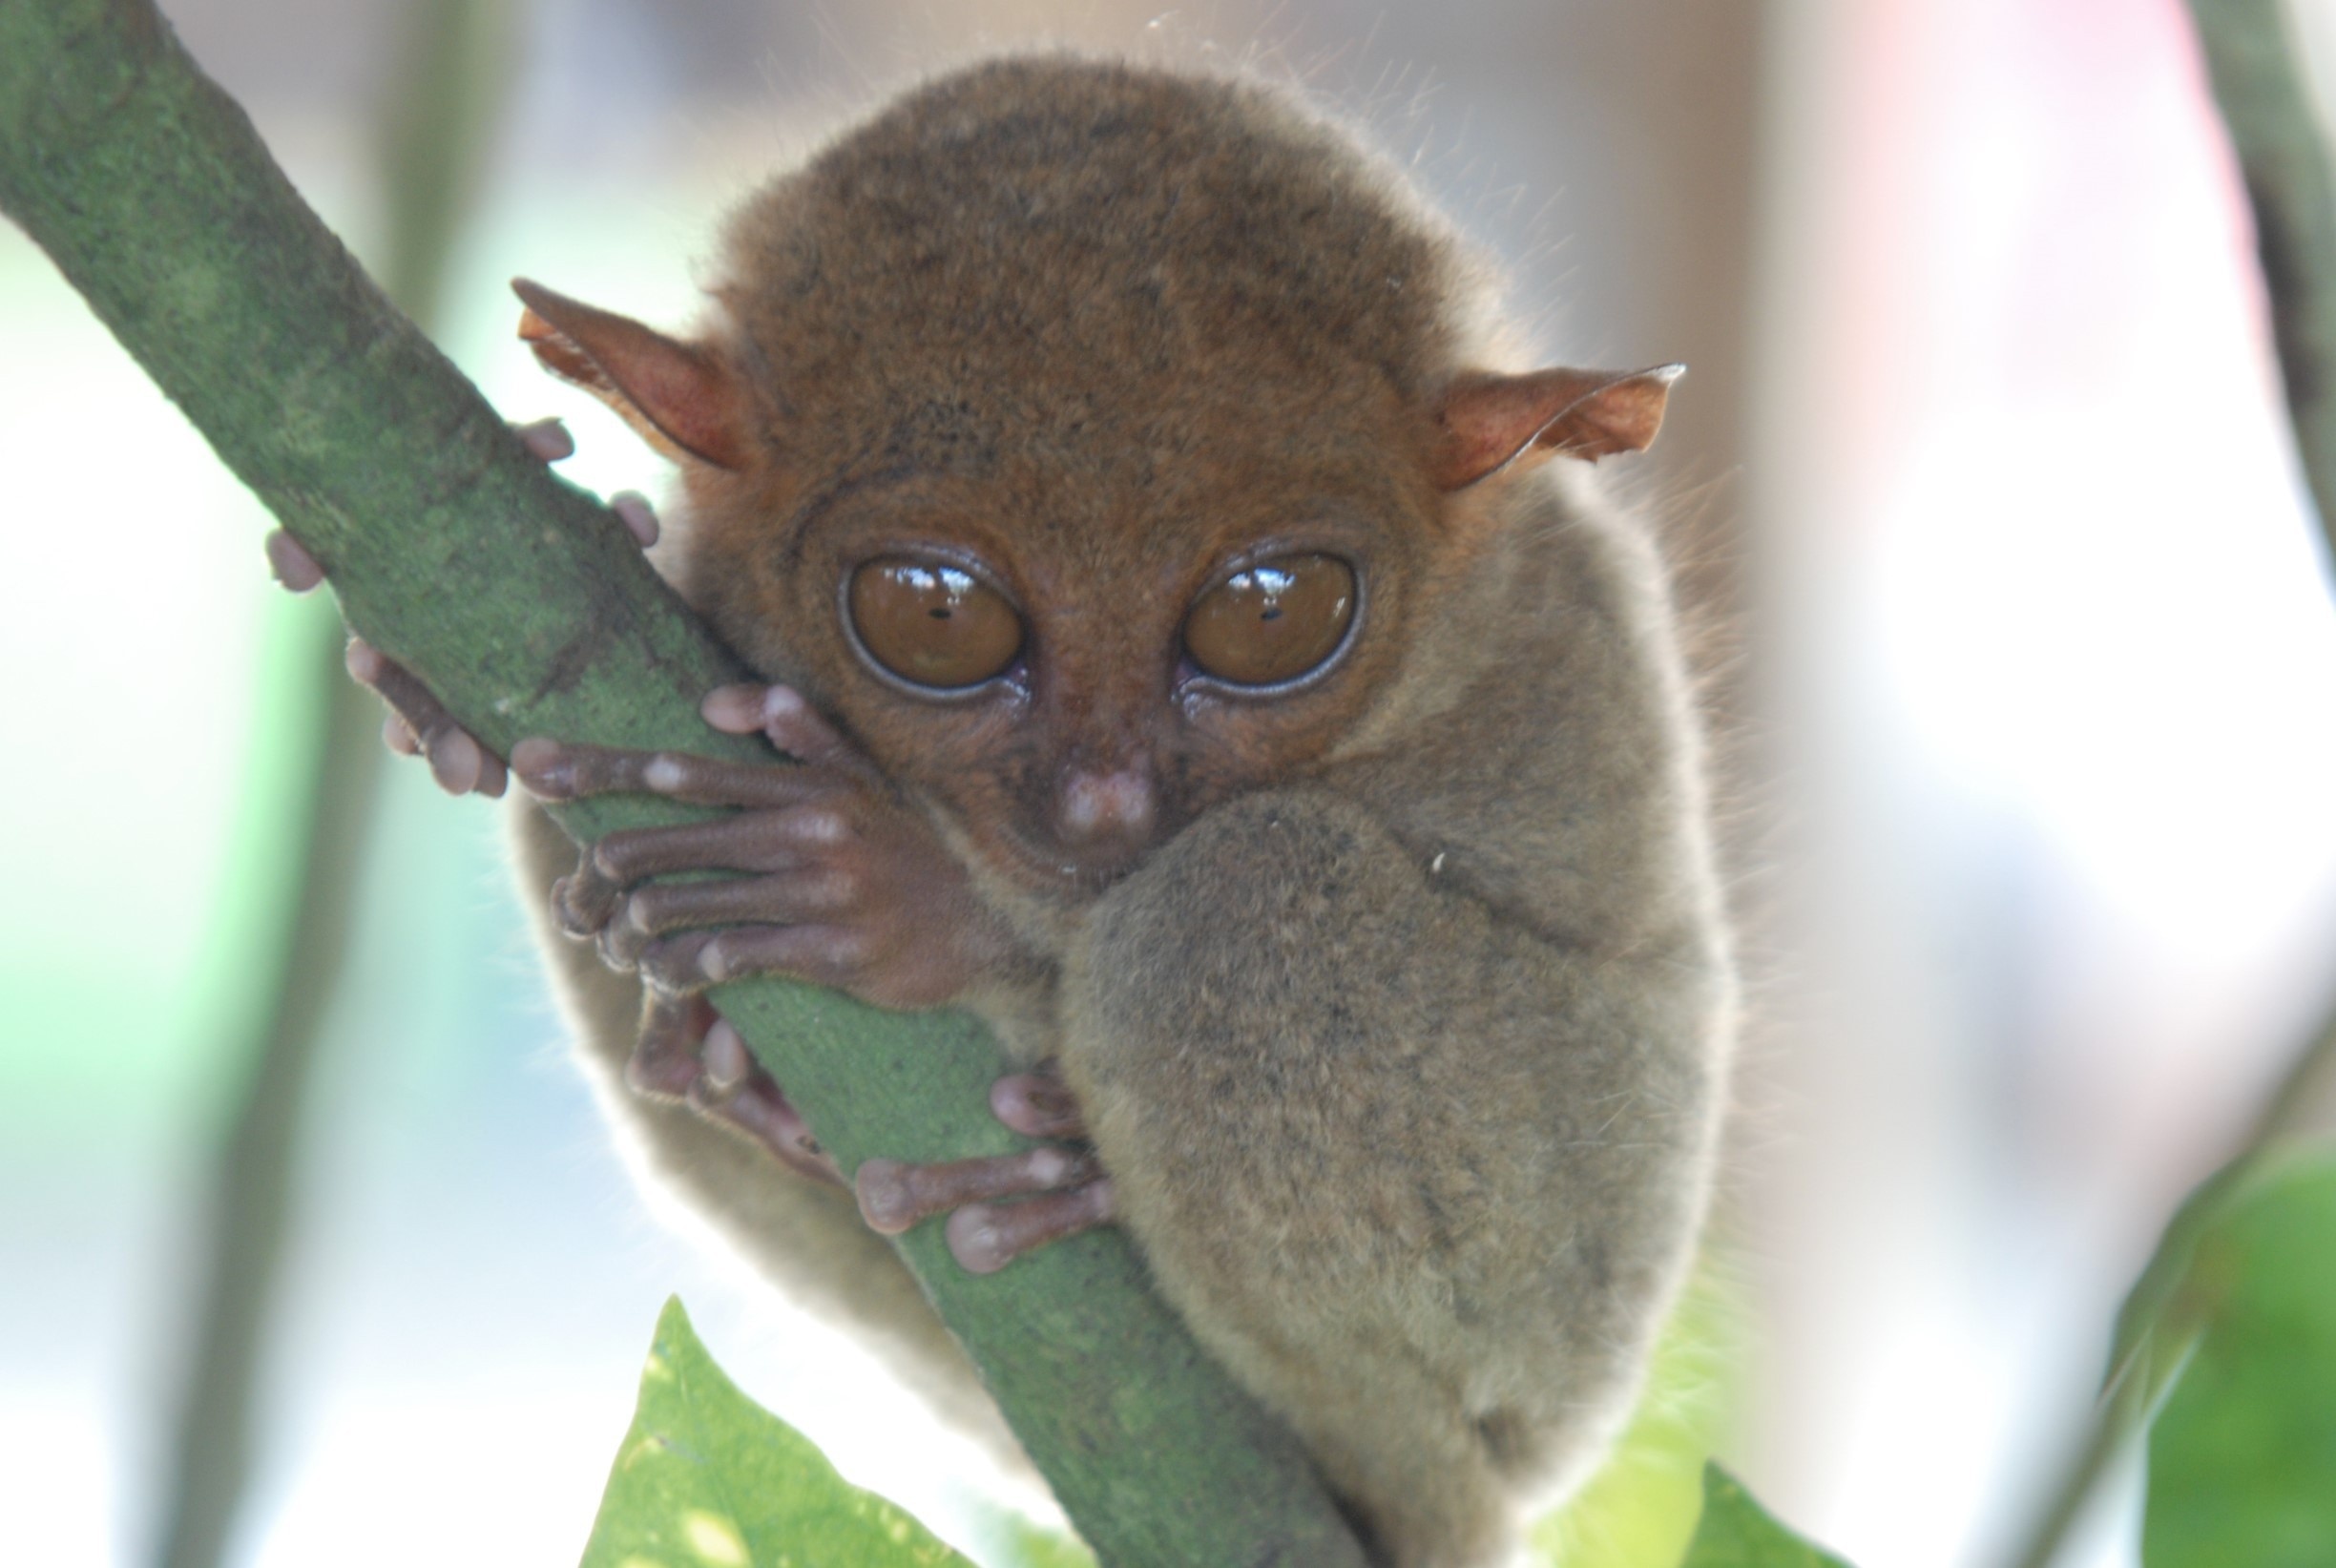 The Philippine tarsier is the smallest primate in the world. This one only looks big because I used a zoom lens but he's actually only as big as my fist. Doesn't he remind you of Yoda from Star Wars?